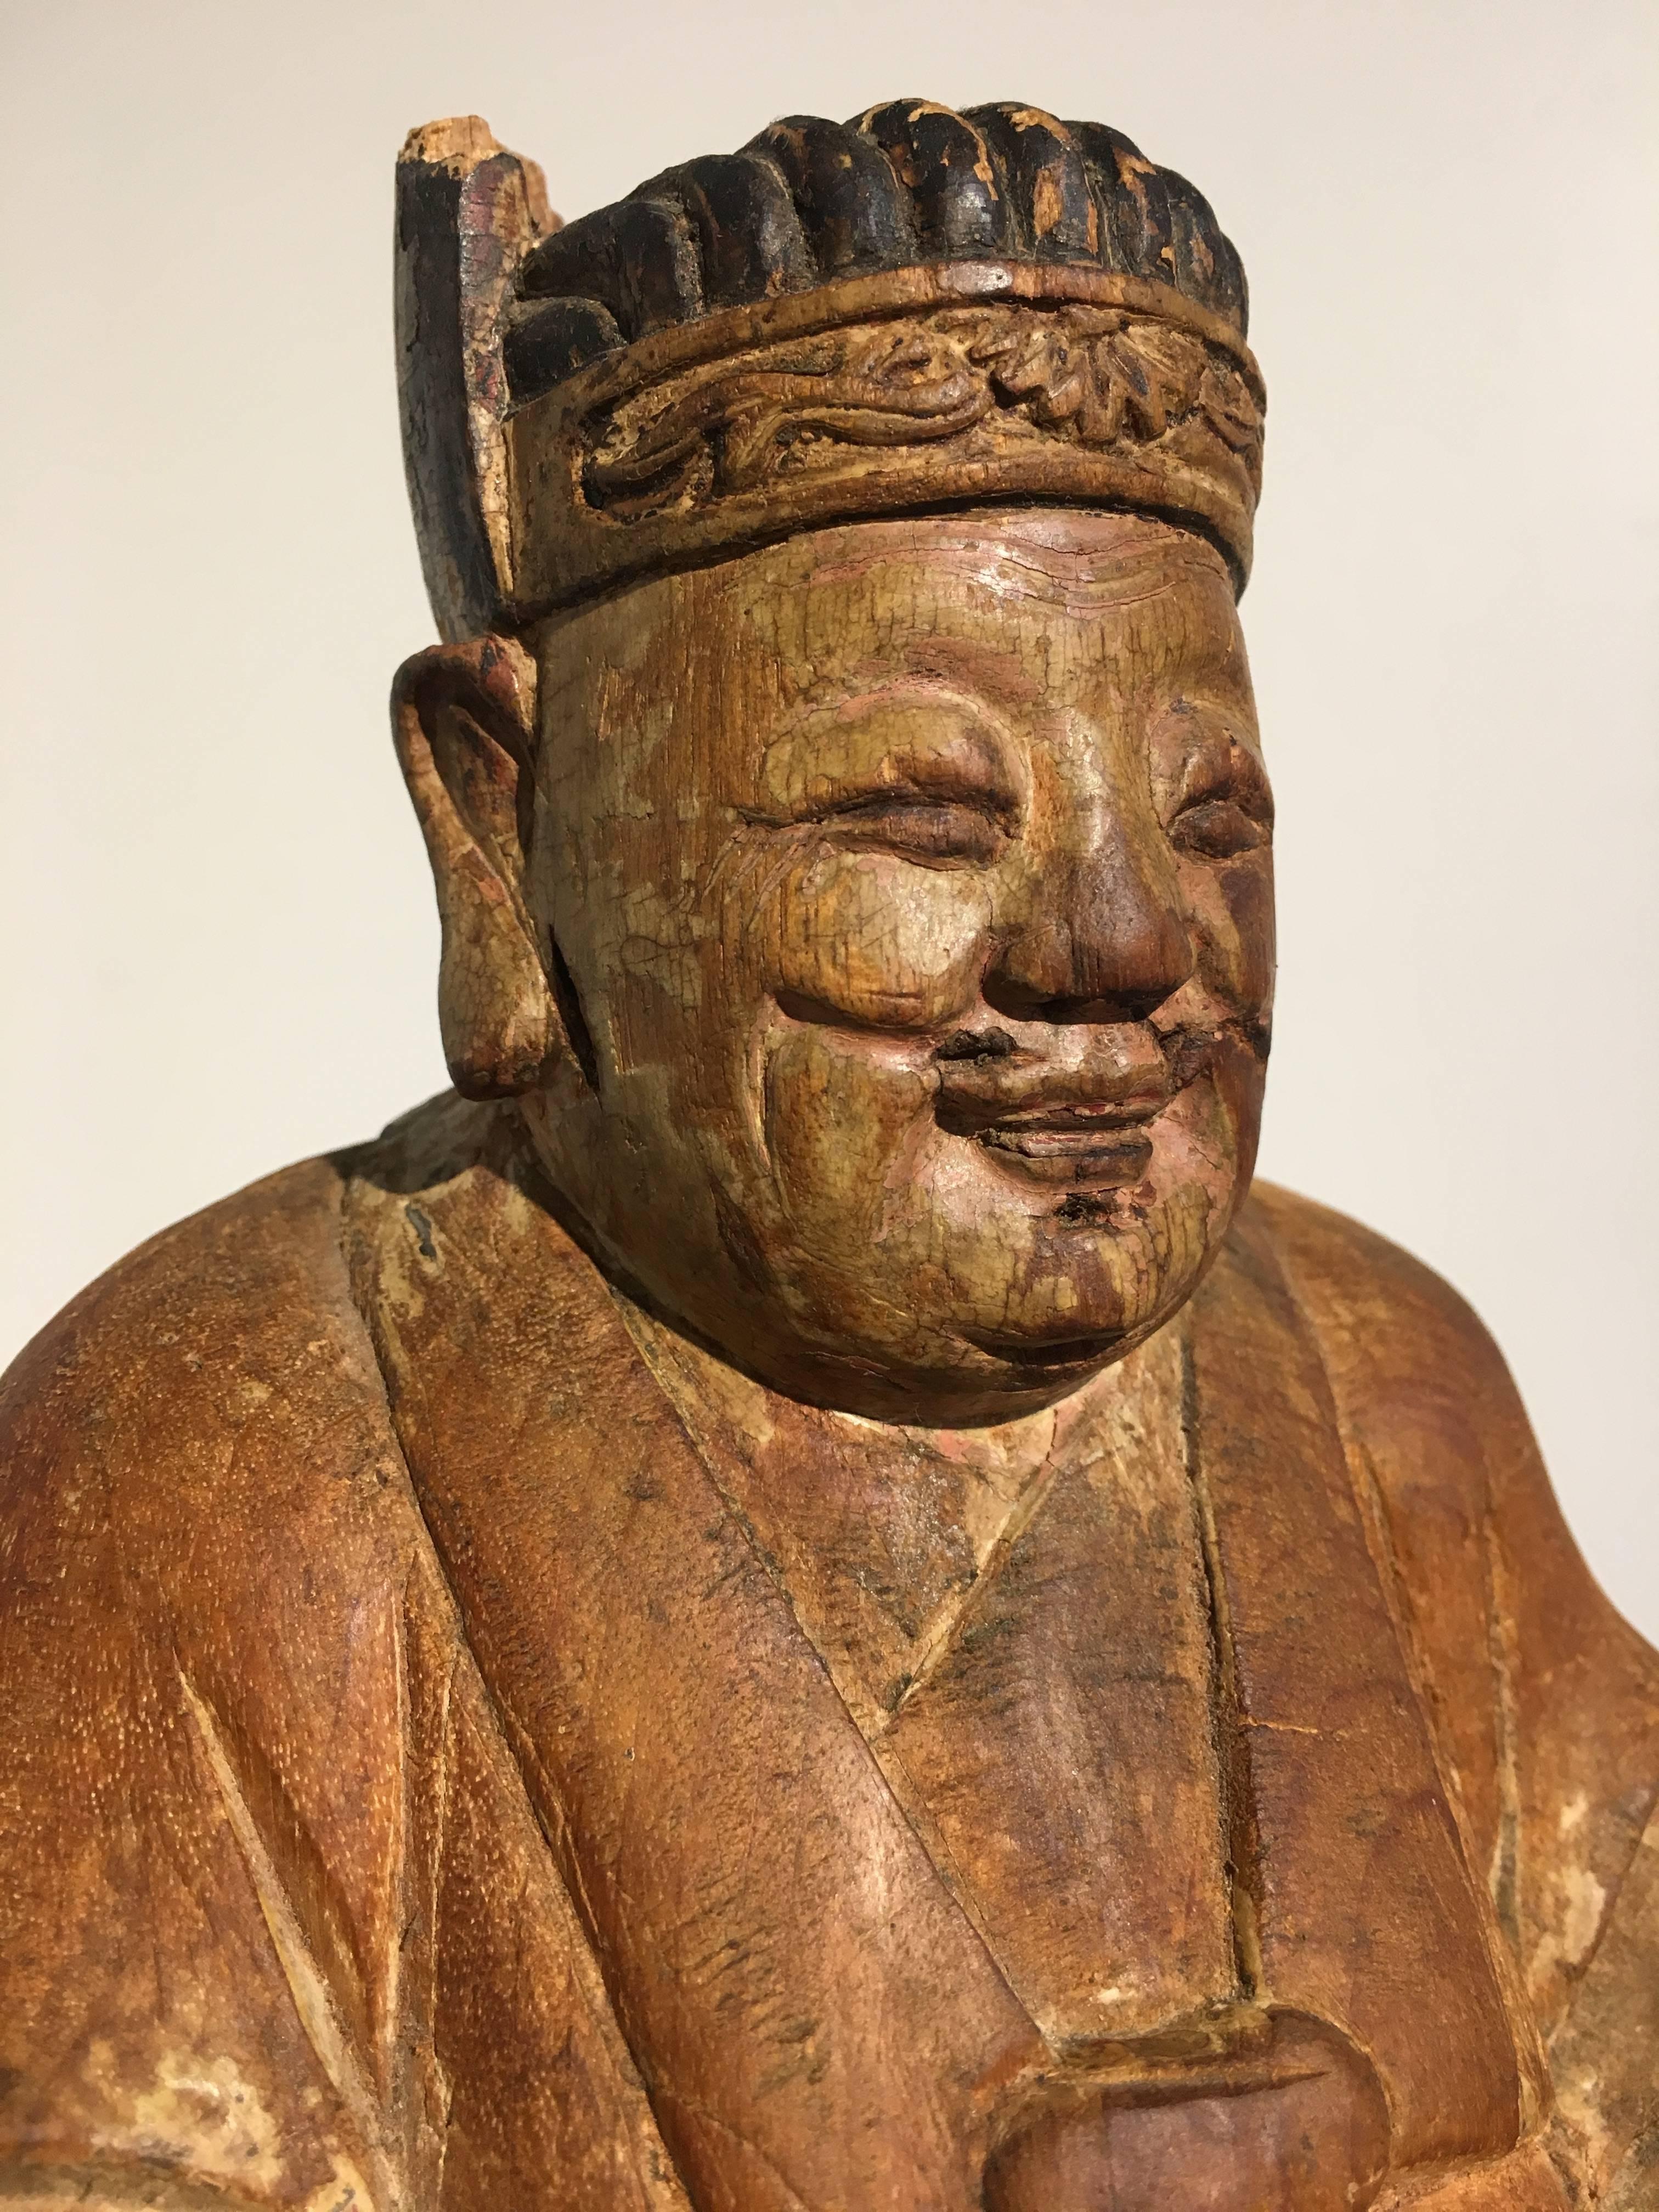 Ming 17th Century Chinese Carved Camphor Wood Figure of Caishen, the God of Wealth